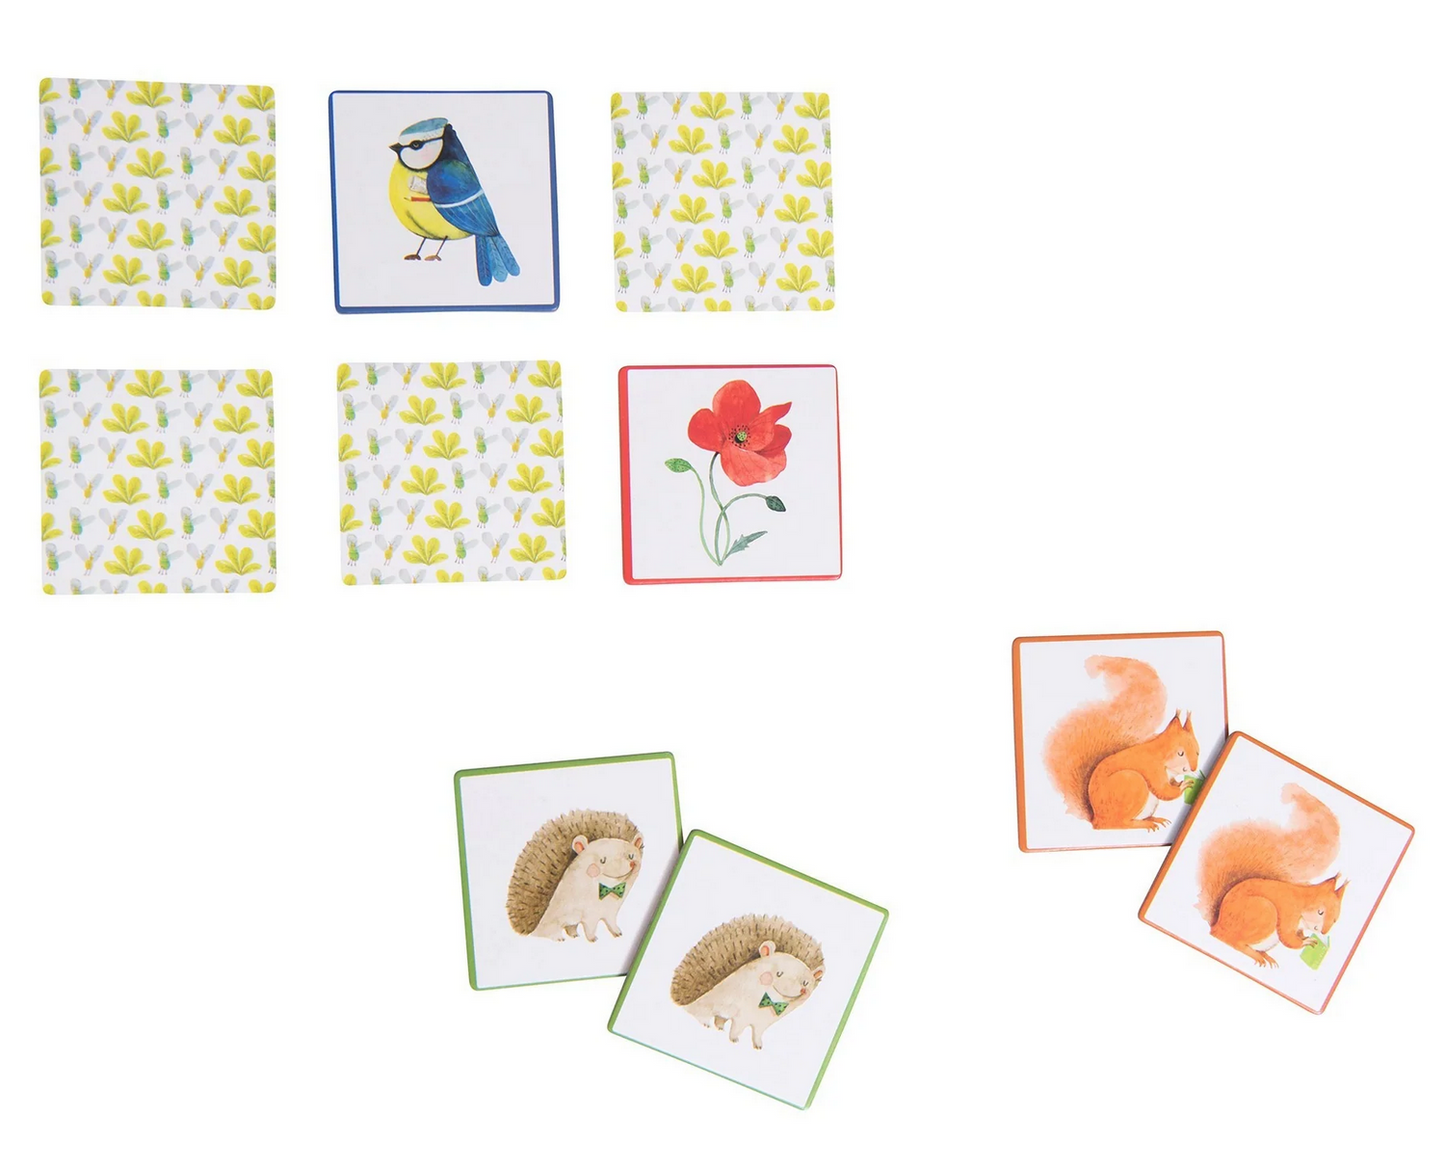 Le Botaniste - Nature Memory Game  By Moulin Roty